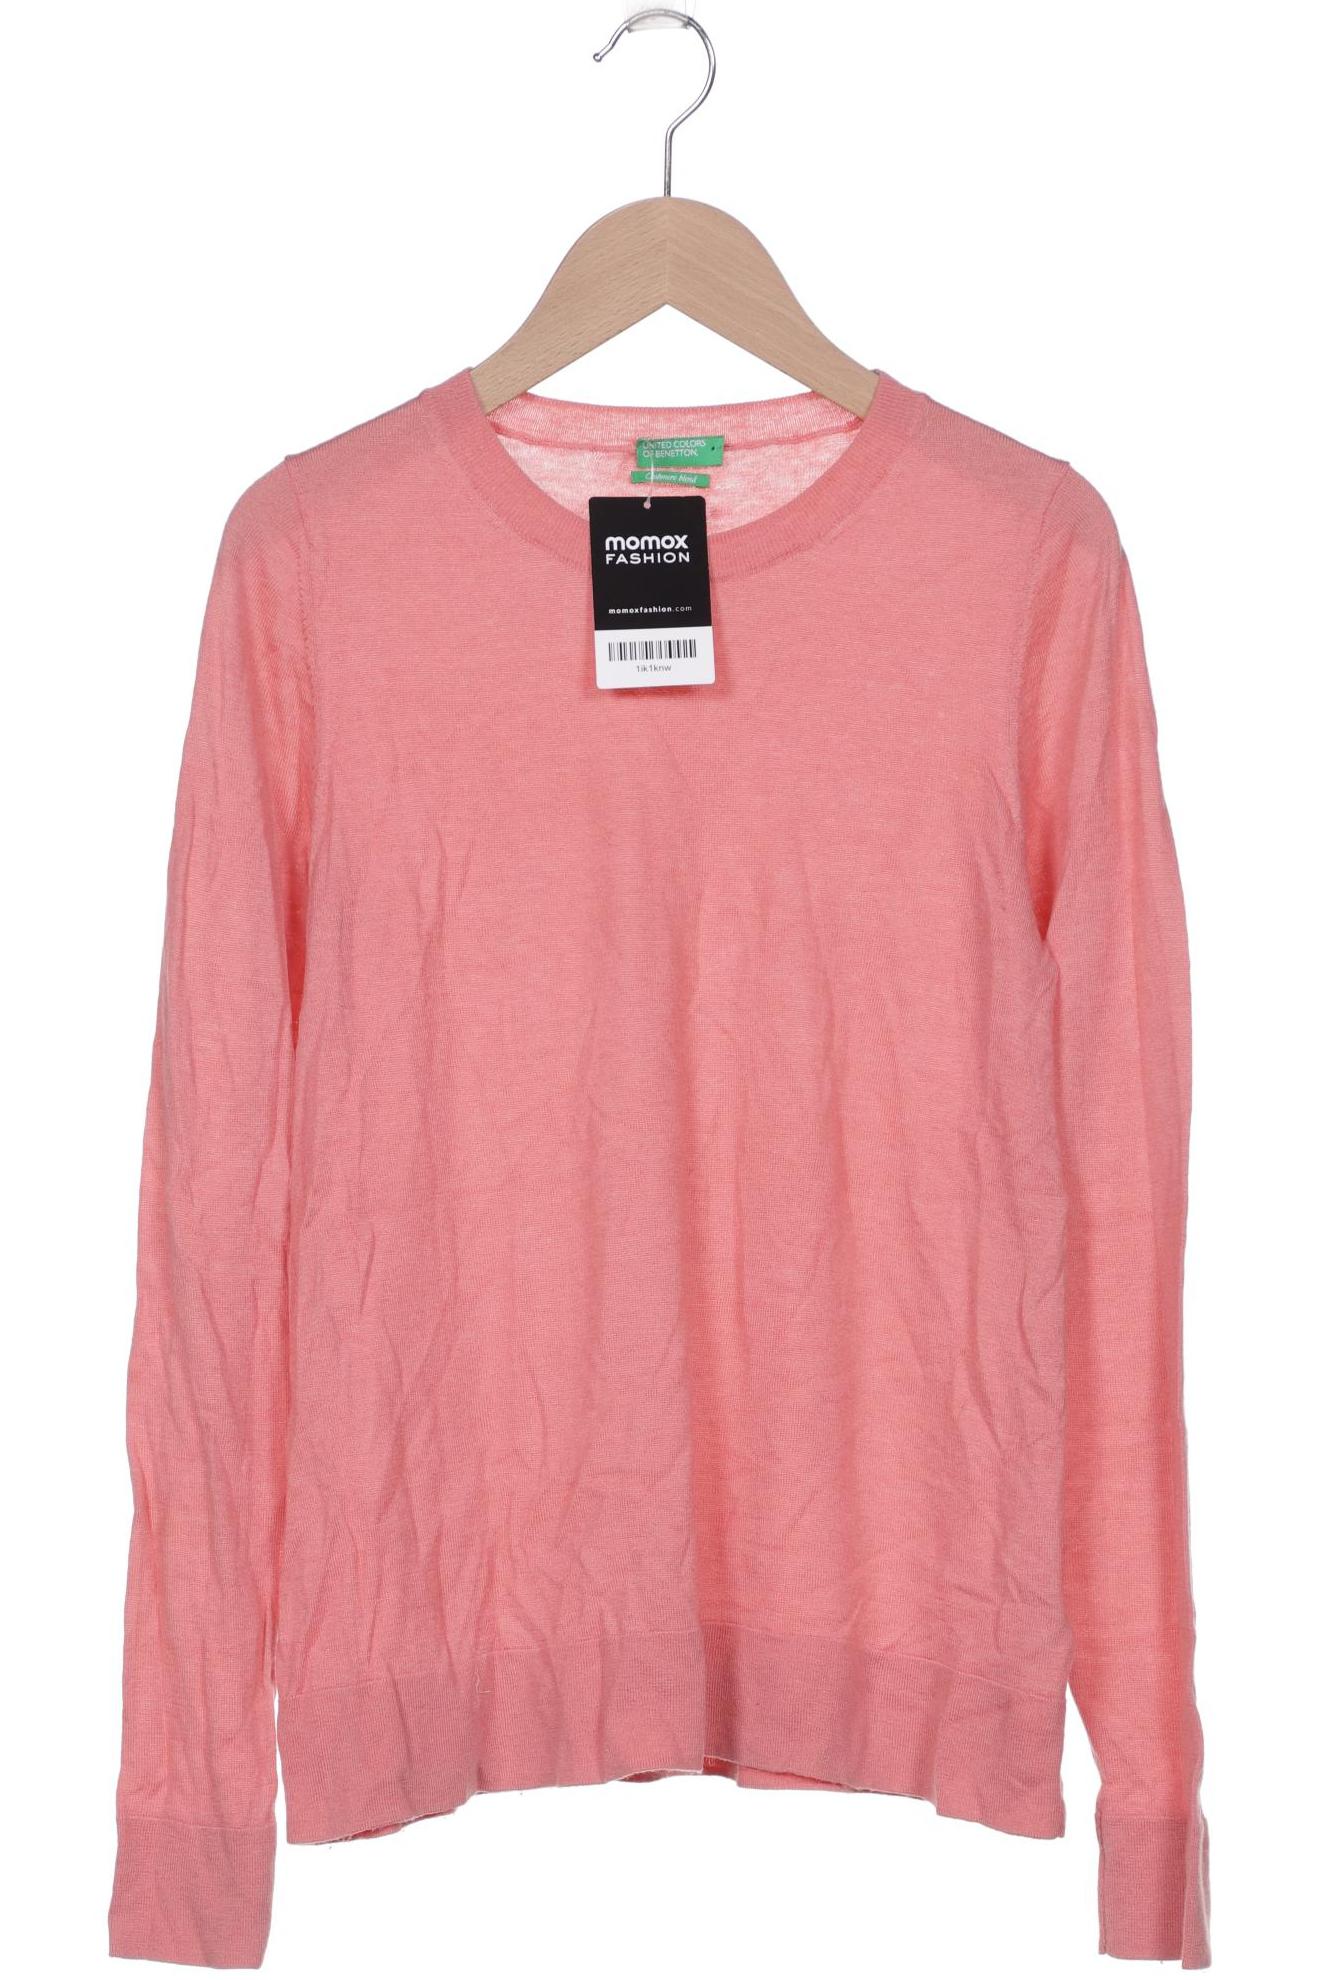 United Colors OF Benetton Damen Pullover, pink, Gr. 34 von United Colors of Benetton